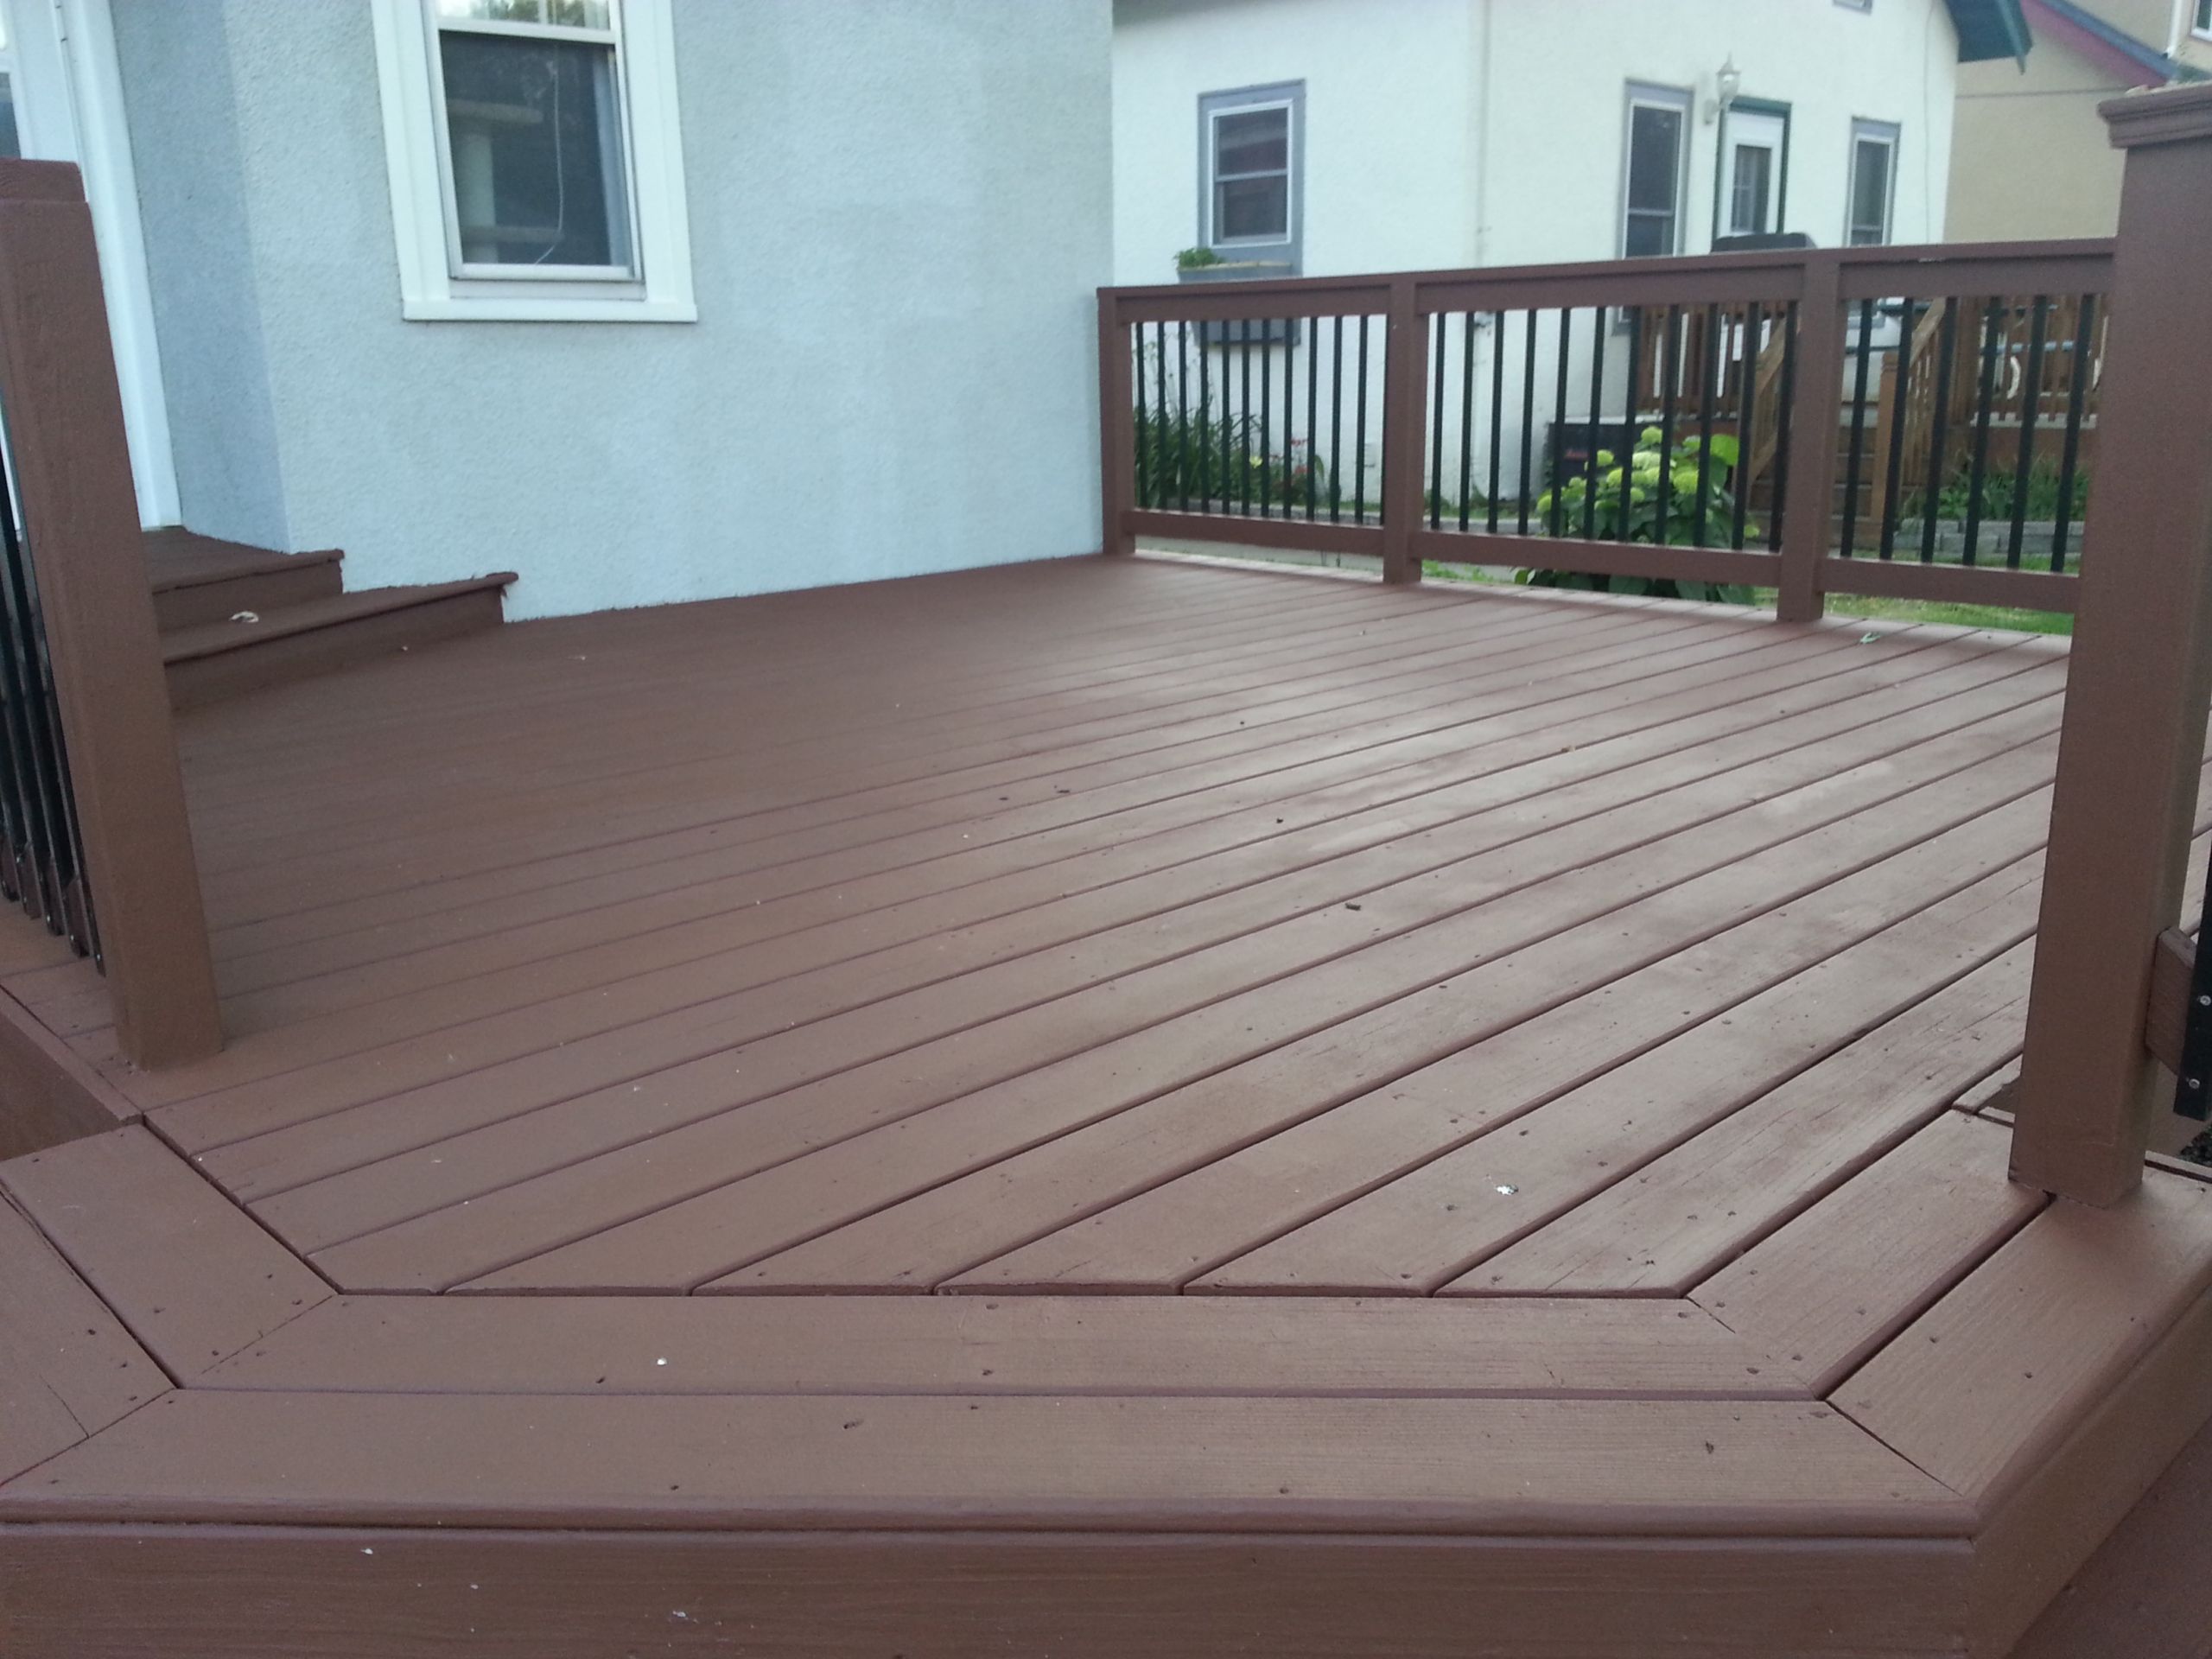 Deck Over Paint Colors
 what if it rains on Behr DeckOver